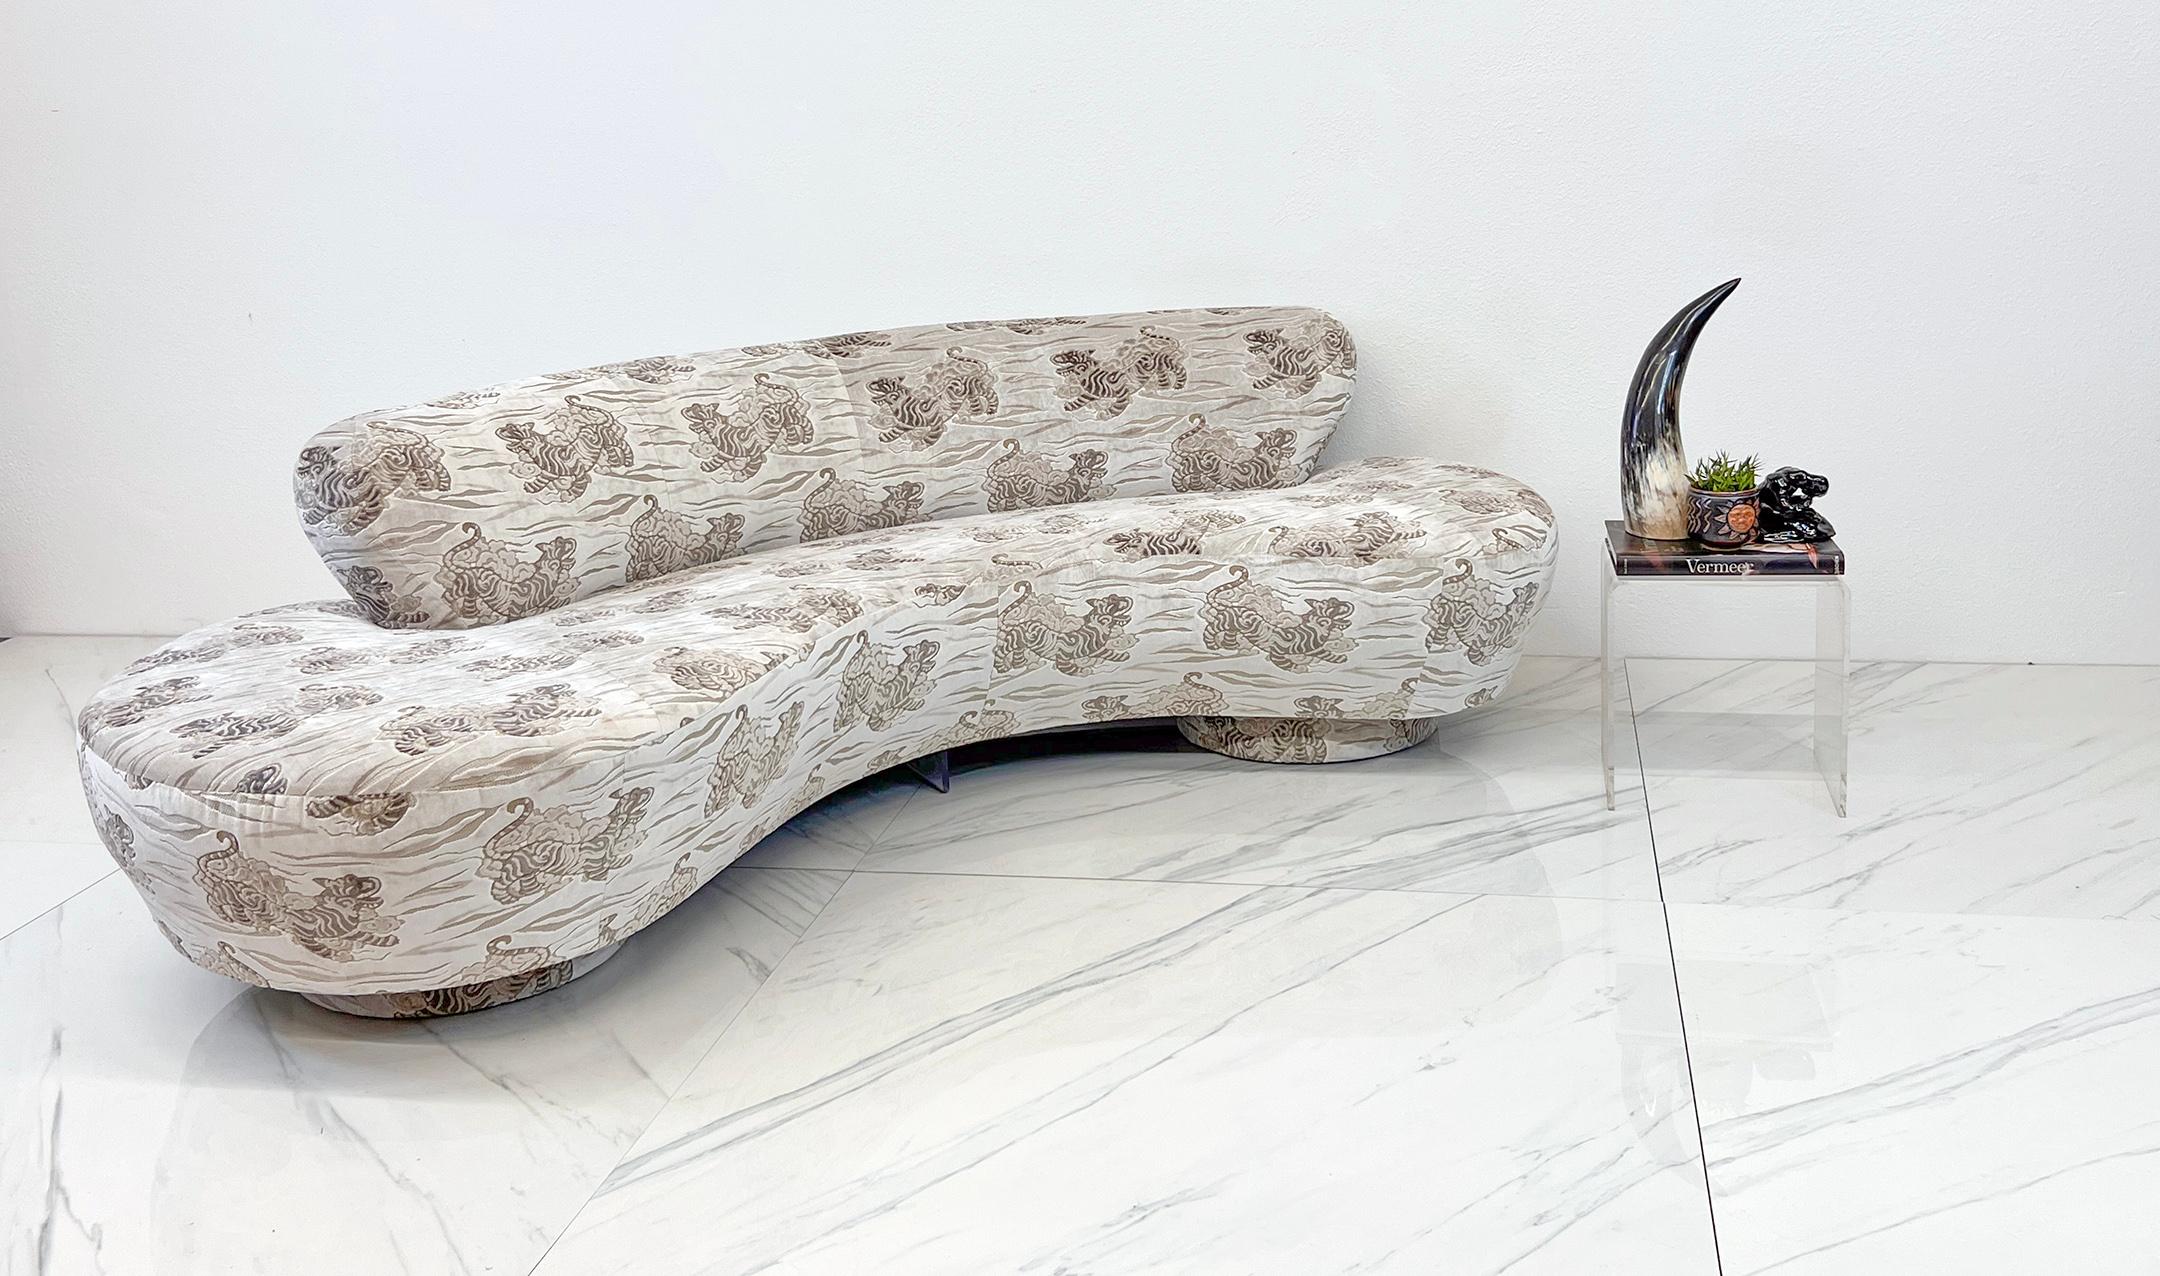 
This Vladimir Kagan Cloud sofa is divine! This is not just any sofa; it's a fantastical journey into the world of design where comfort meets chic in the most delightful way possible.

Imagine yourself reclining on a cloud, surrounded by the